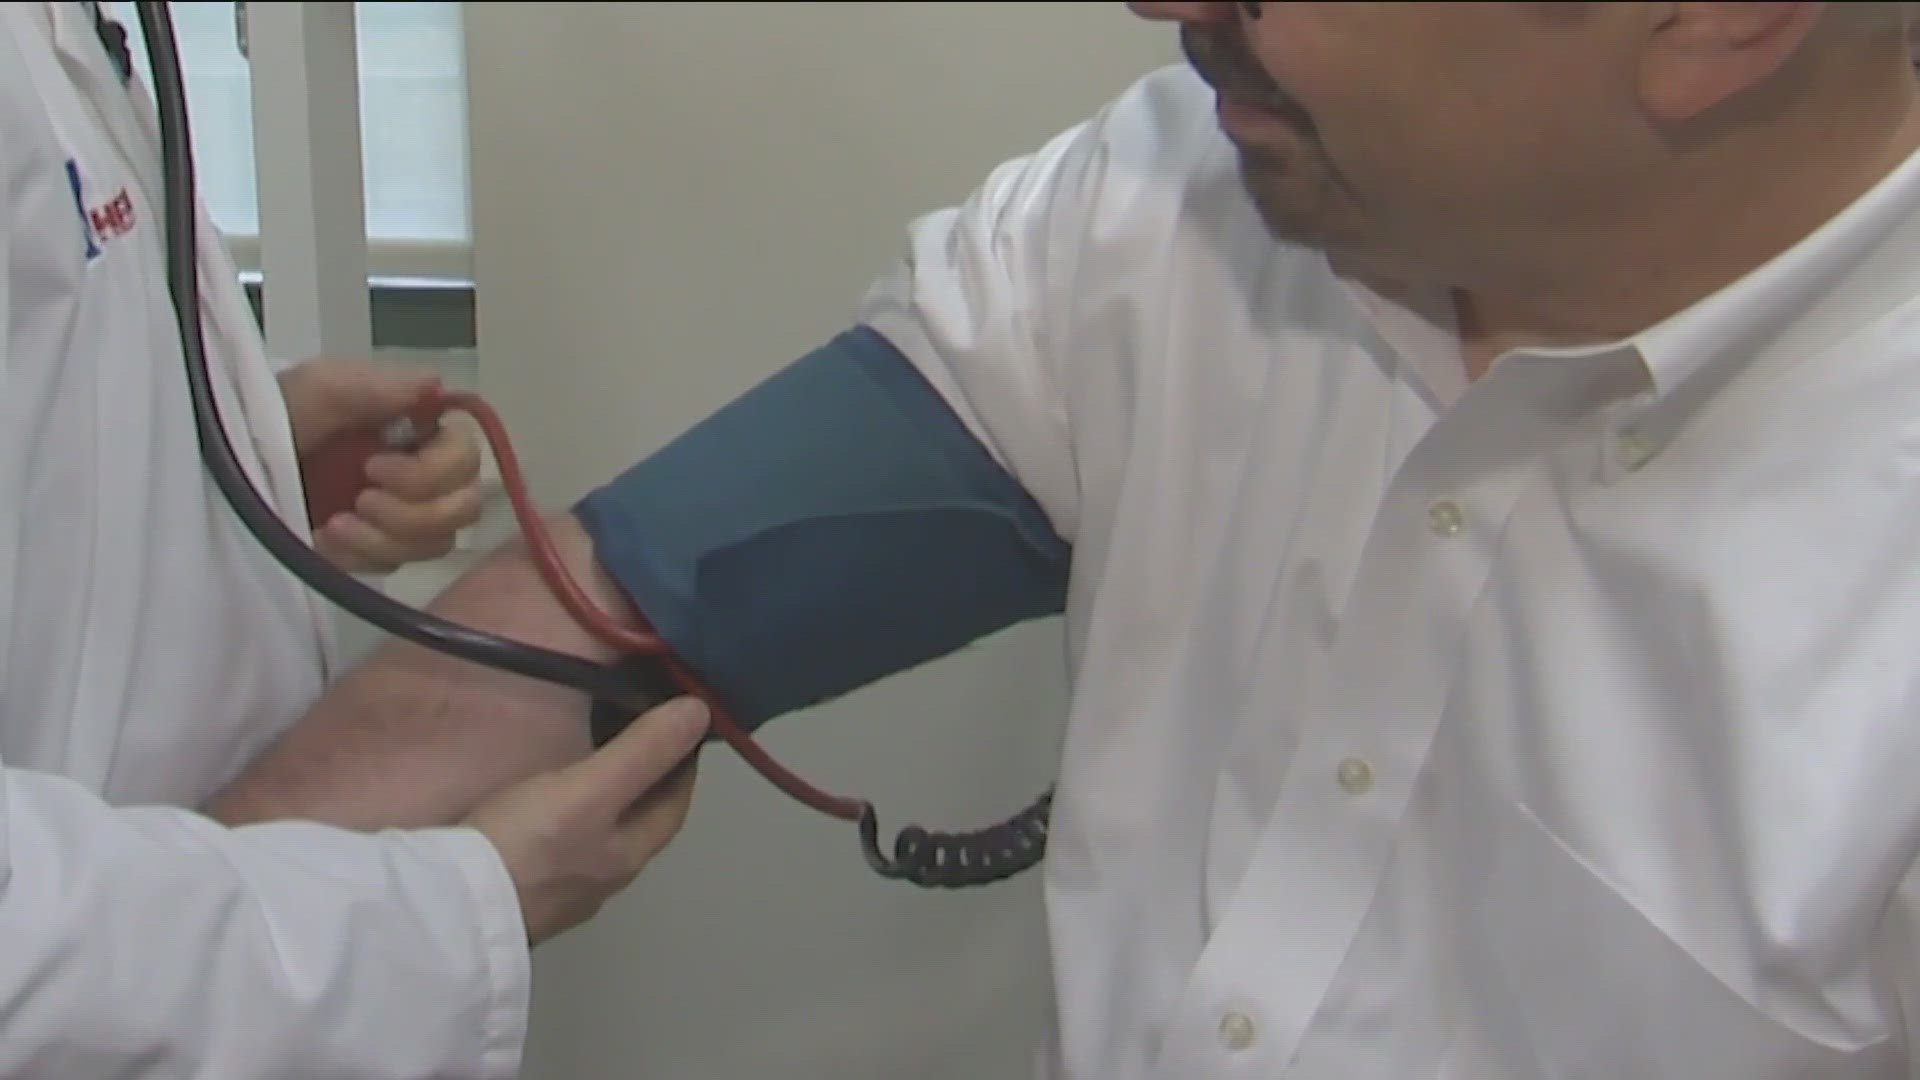 NEW AT 6 - A NEW PROGRAM OFFERS 50 AMERICAN HYPERTENSION CERTIFICATION TO CLINICIANS ACROSS THE COUNTRY....TO TACKLE HEALTH DISPARITIES FOR BLACK AMERICANS...